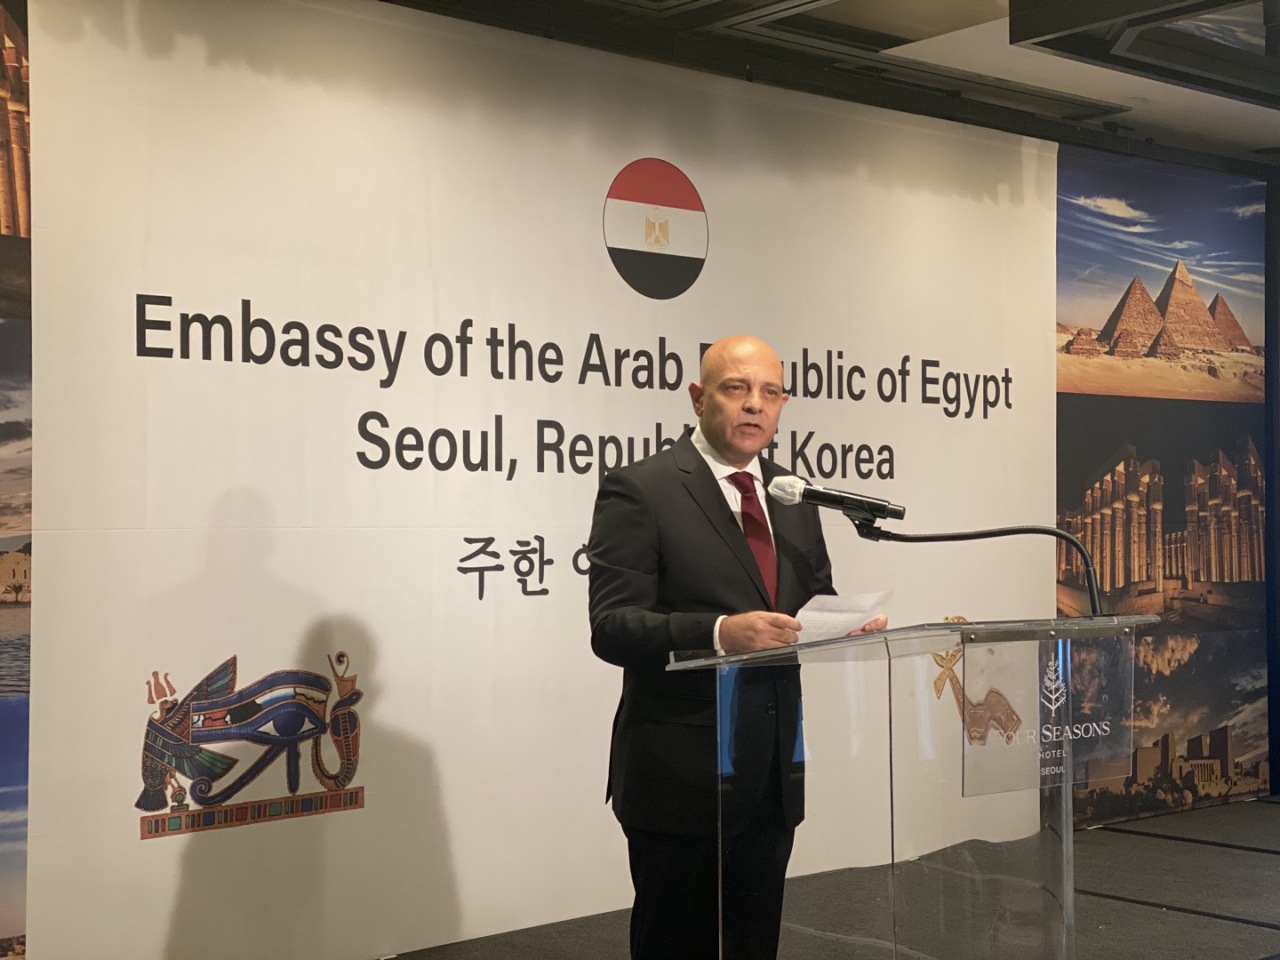 Egyptian Ambassador Khaled Abdel Rahman welcomes guests and delivers opening remarks for Egypt’s National Day celebrations at the Four Seasons Hotel in Seoul, July 22. (Sanjay Kumar/The Korea Herald)